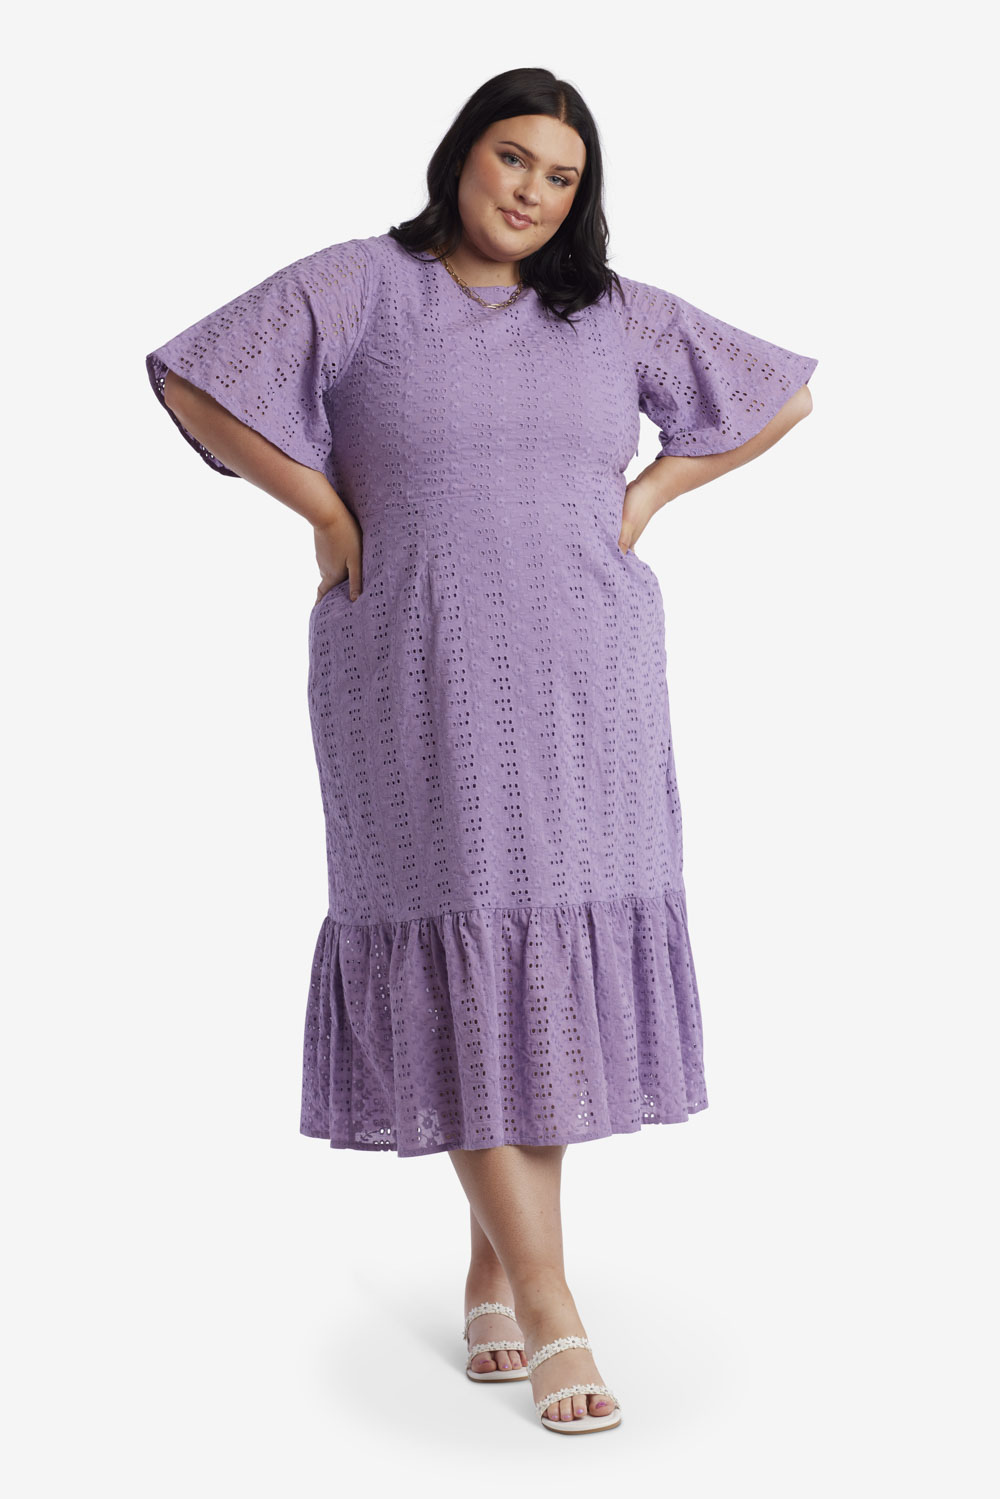 https://www.sweetsaltclothing.com/mm5/graphics/00000001/7/1420562_P_Cambria_Dress_Lace_Fitted_Bodice_Mermaid_Skirt_Purple-1427.jpg